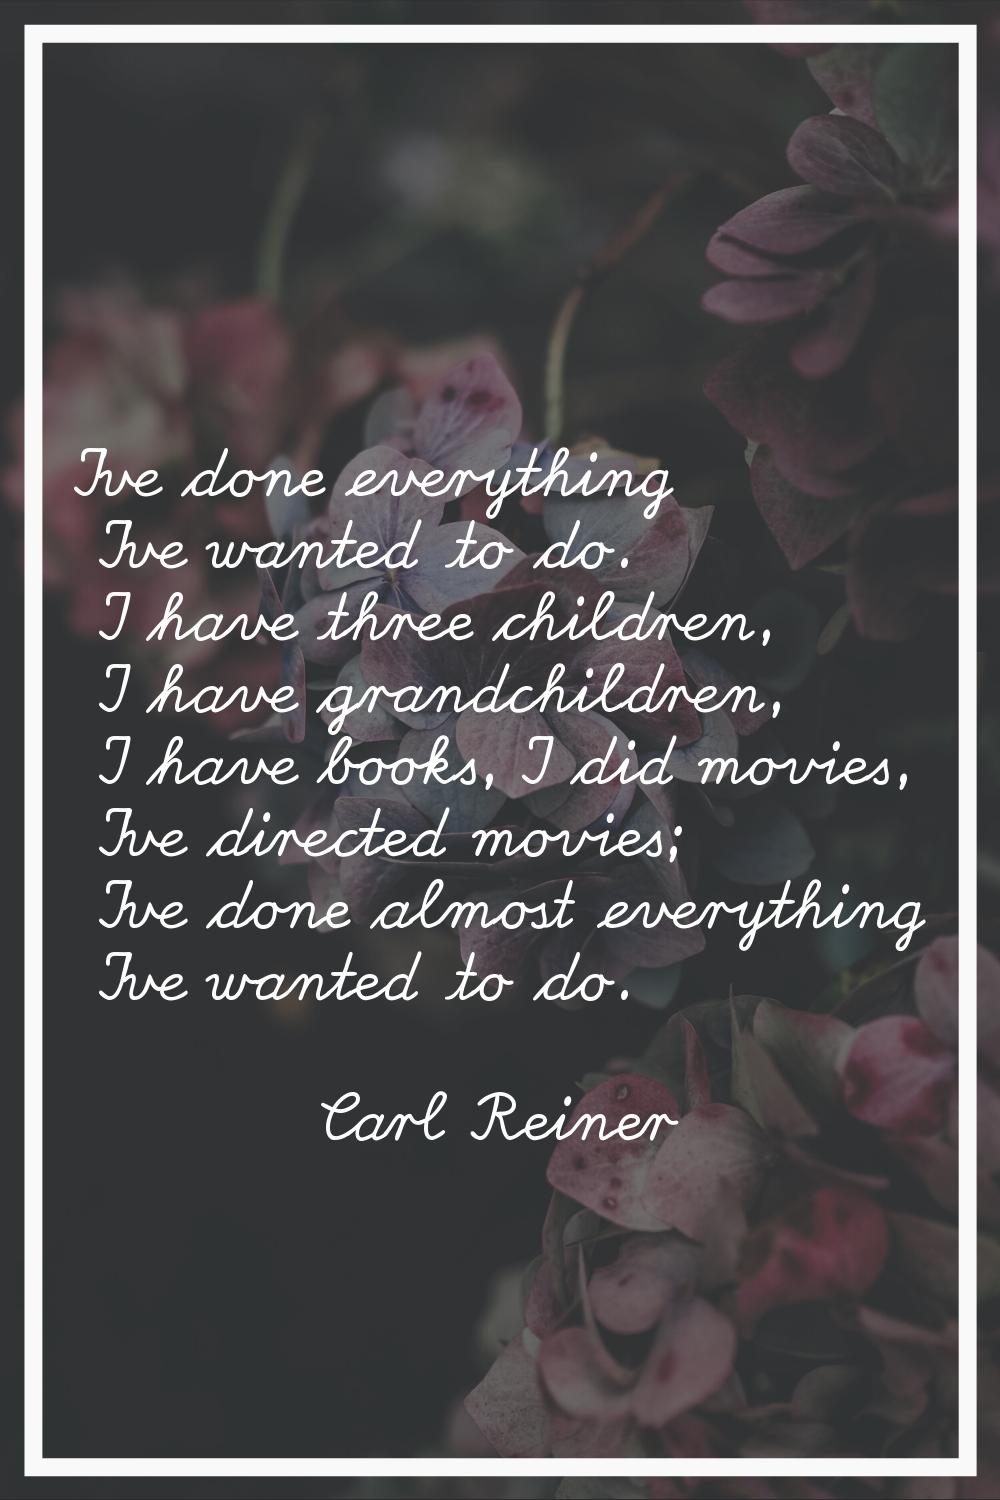 I've done everything I've wanted to do. I have three children, I have grandchildren, I have books, 